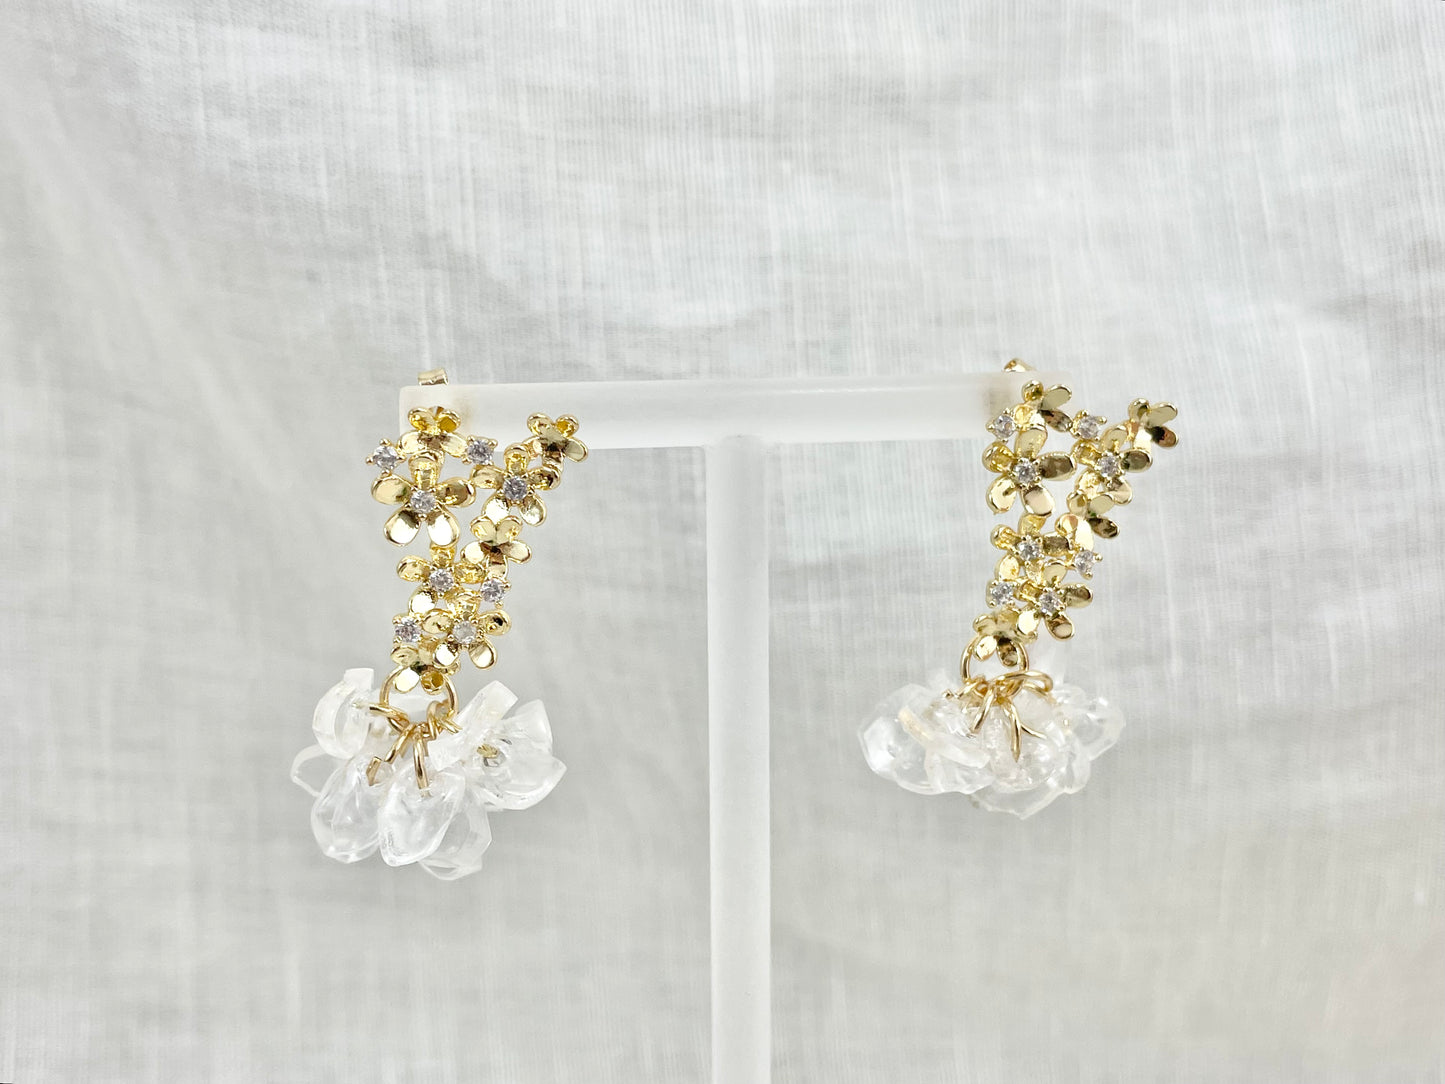 Upcycled earrings - cristal mini flowers - 14KGF